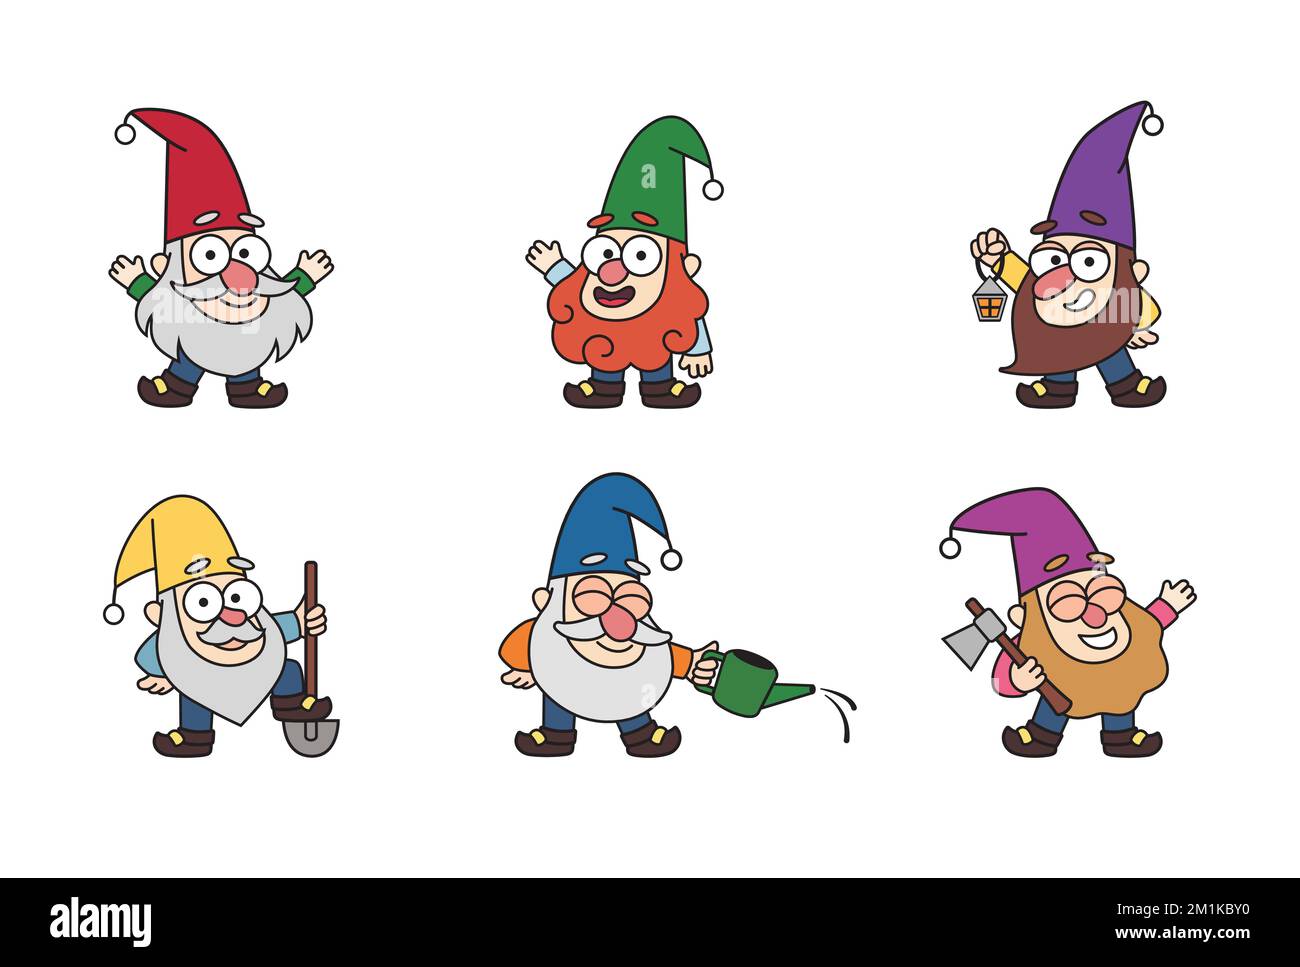 Cheerful little garden gnomes, dwarfs, old men, gardeners in cartoon style. Colorful vector fairytale kids illustration, drawing characters, mascots, Stock Vector